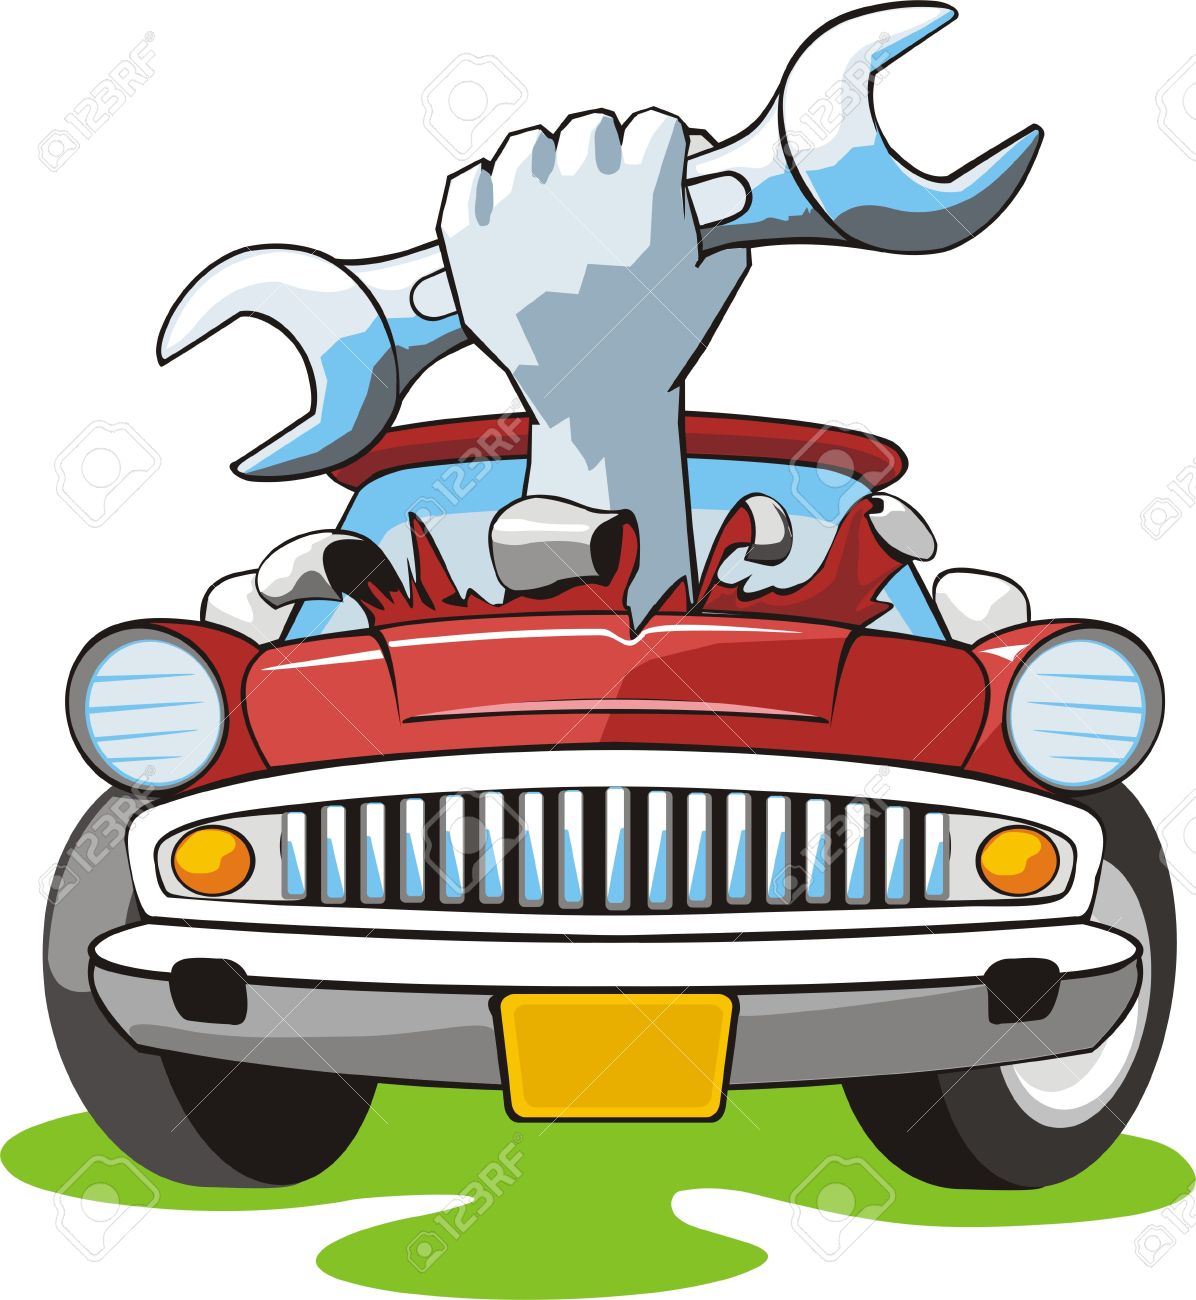 Auto Tools Clipart And Stock Illustrations 2 179